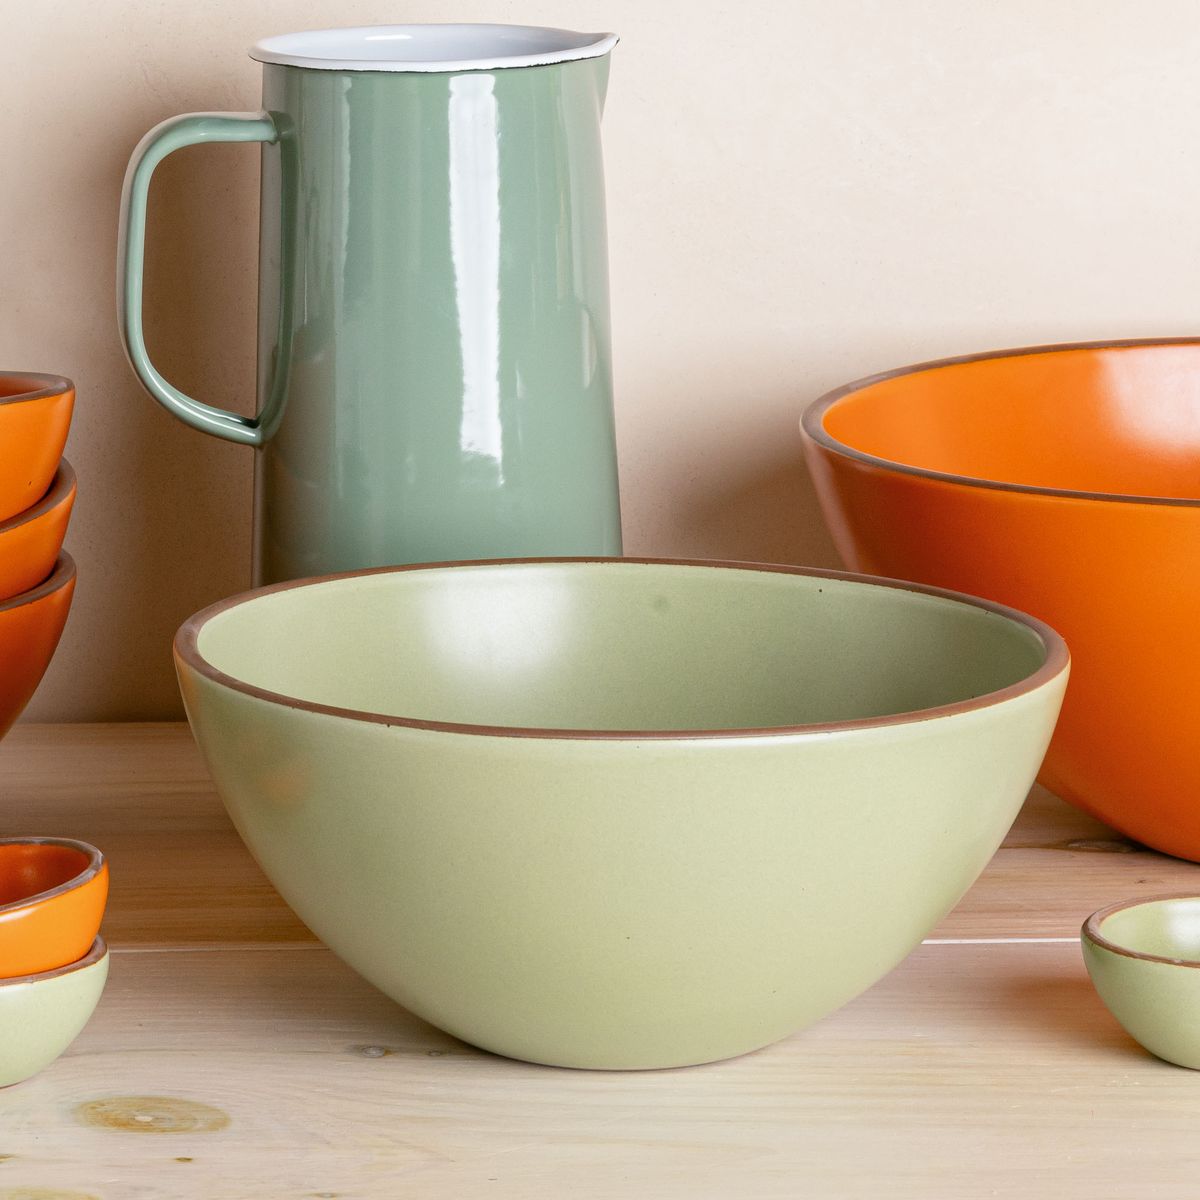 On a shelf, sits a calming sage green popcorn bowl with a sage green watering pitcher and other green and bold orange pottery.